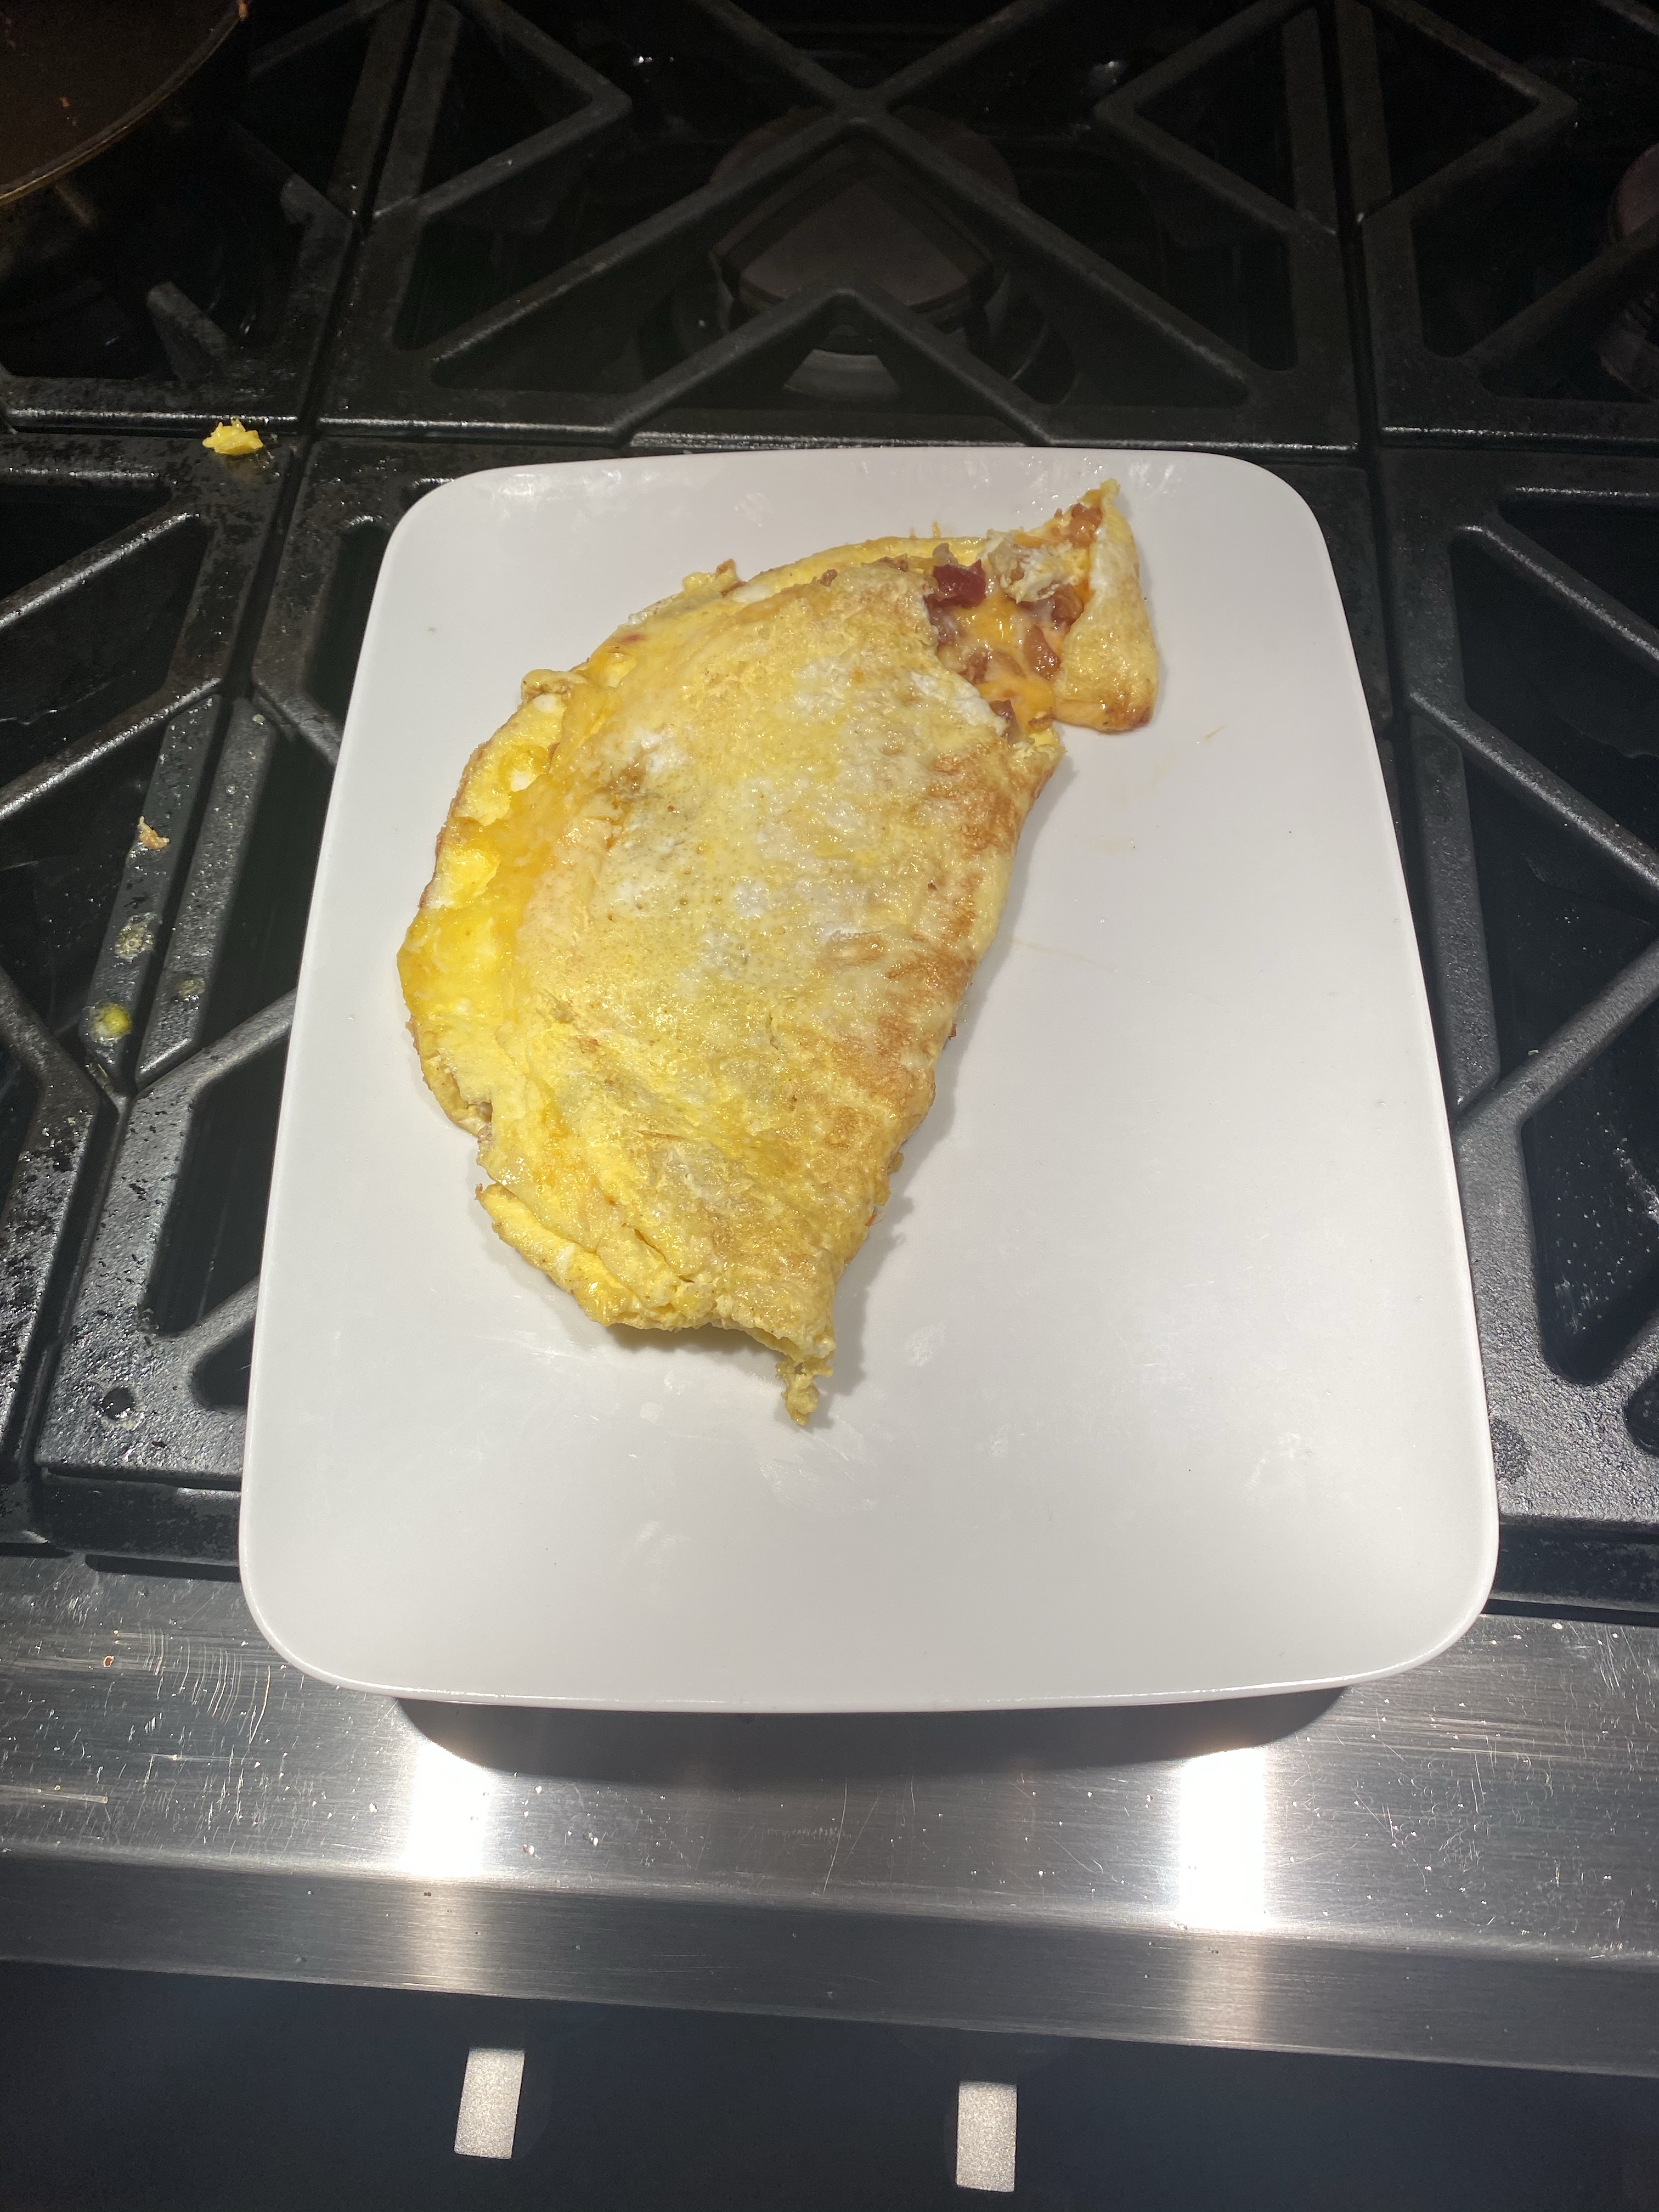 A large folded omelet on a white rectangular plate which is situated on a stovetop.